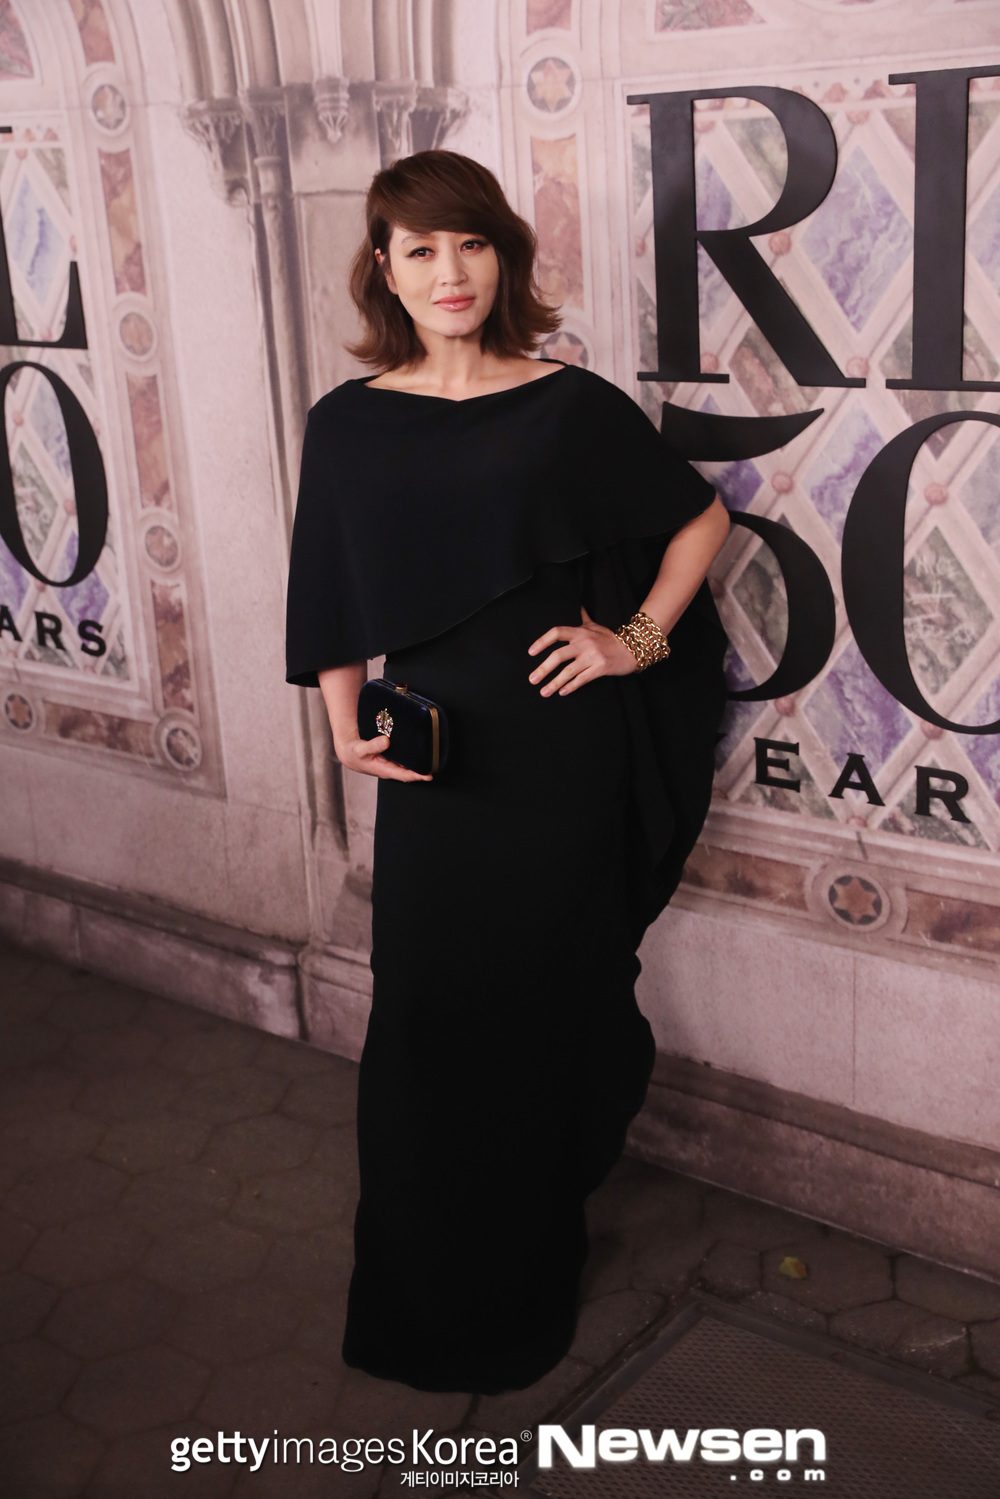 Kim Hye-soo attended New York City Fashion Week.Actor Kim Hye-soo attended the Ralph Lauren Fashion show during New York City Fashion Week on September 7 (local time).Kim Hye-soo, who wore a black dress, was baptized Flash in a glamorous figure and elegant charisma.emigration site